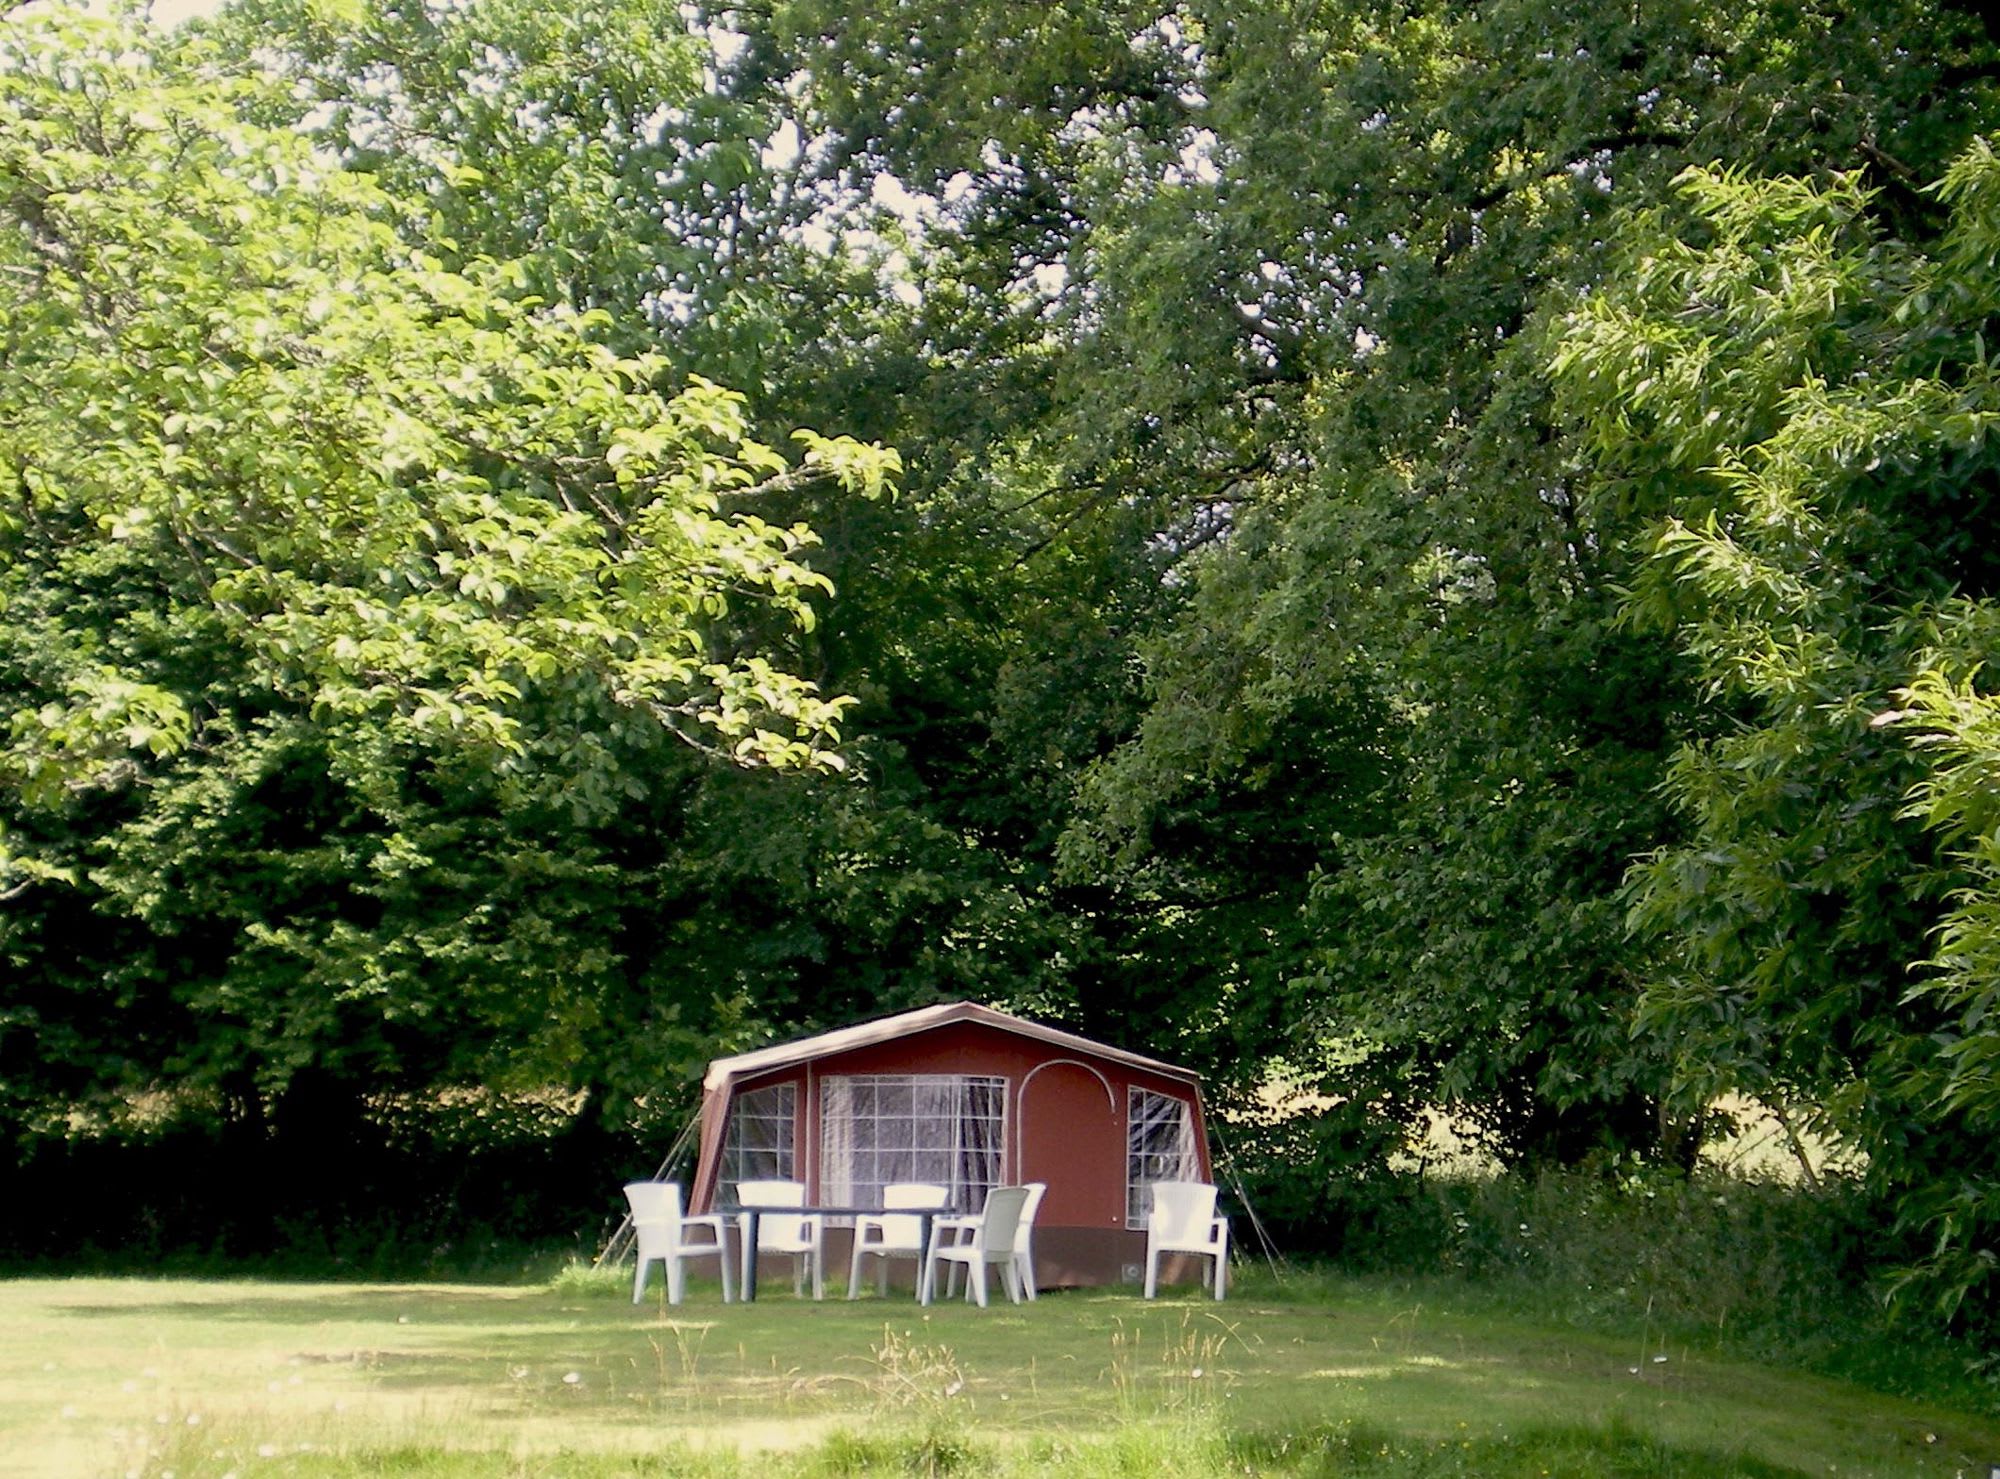 Discreet, serene hideaway in the heart of the Creuse region of Limousin.